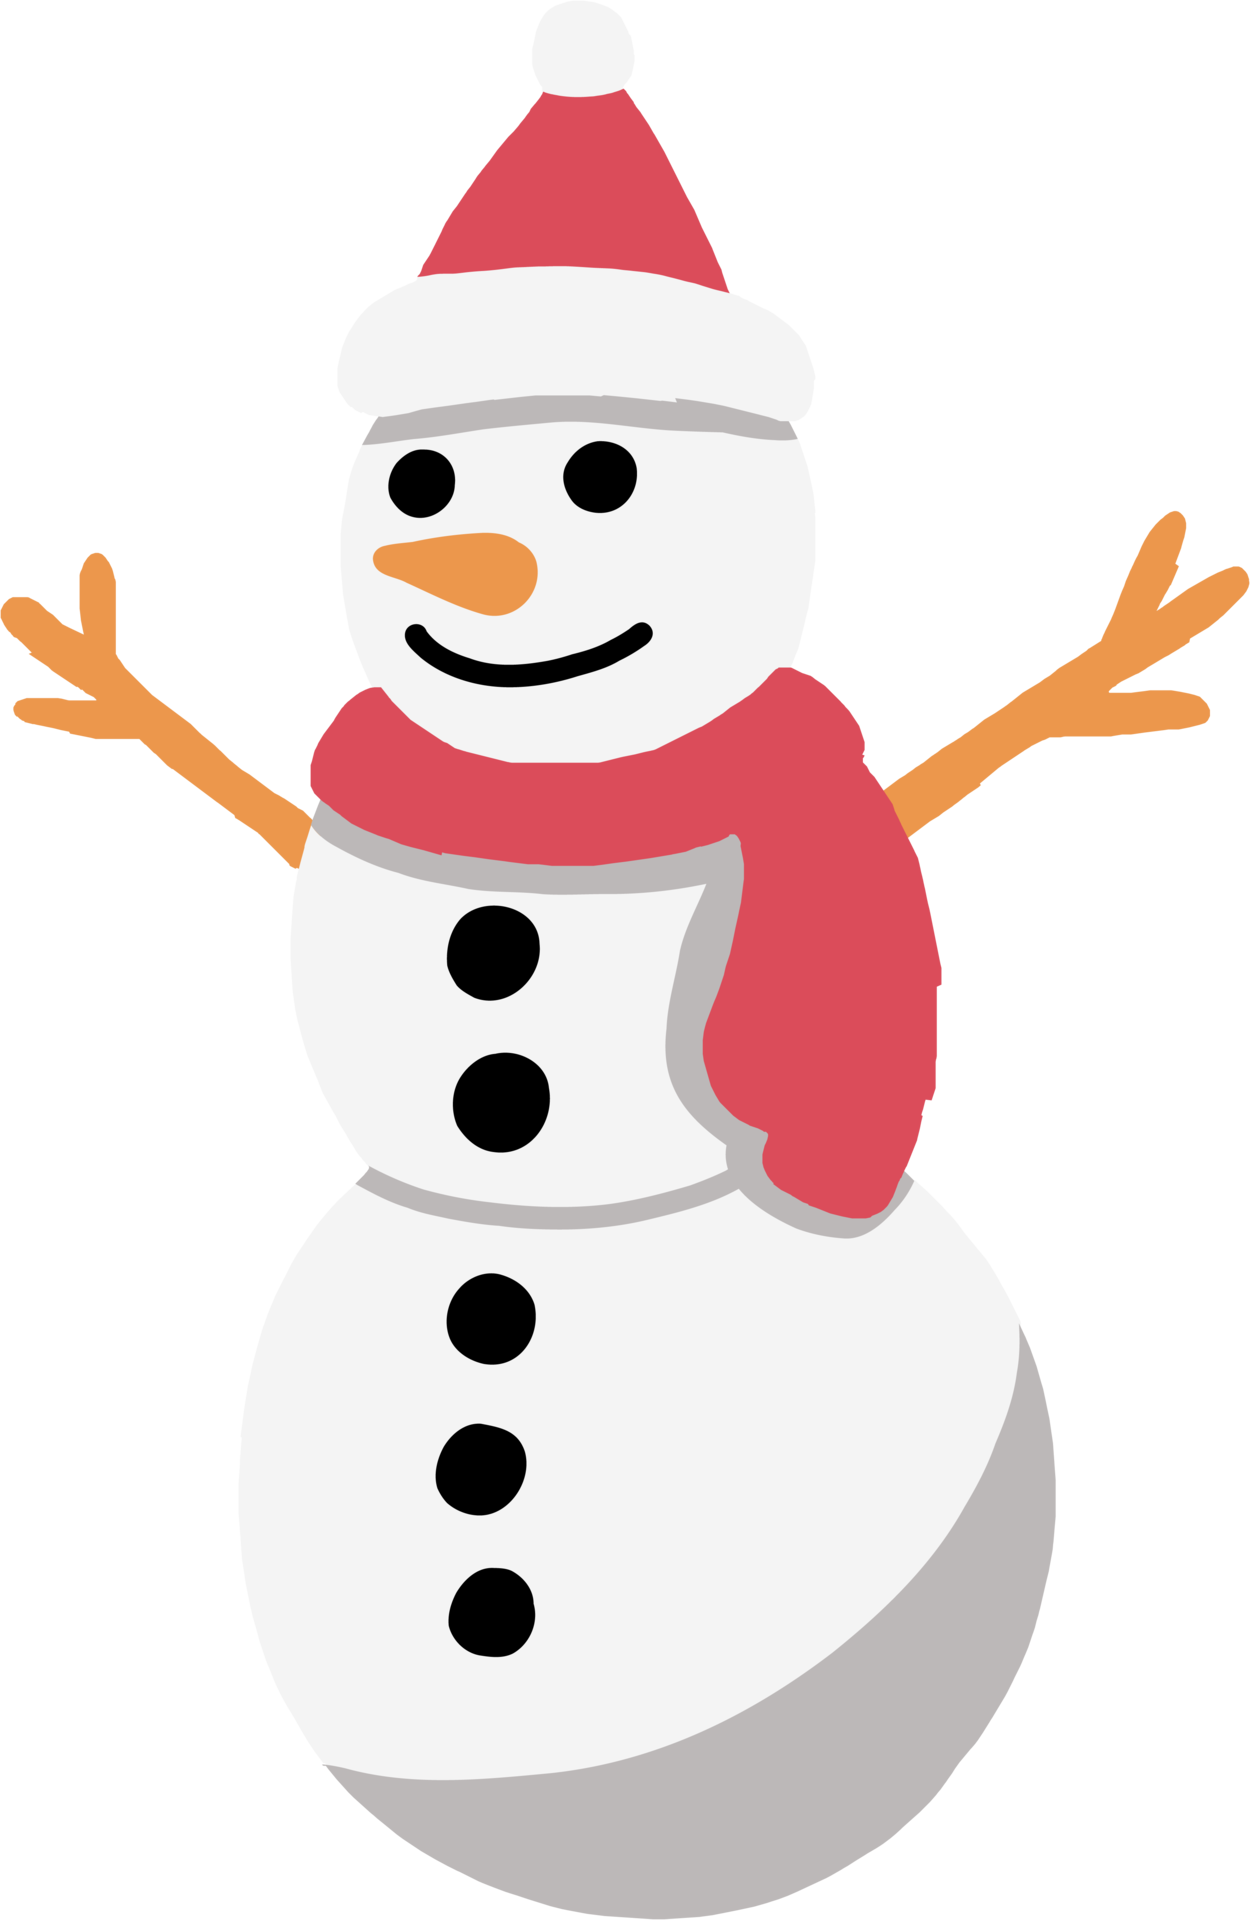 How To Draw A Cute Snowman  Snowman Drawing Easy  Merry Christmas  Drawing  Pencil Drawing  YouTube